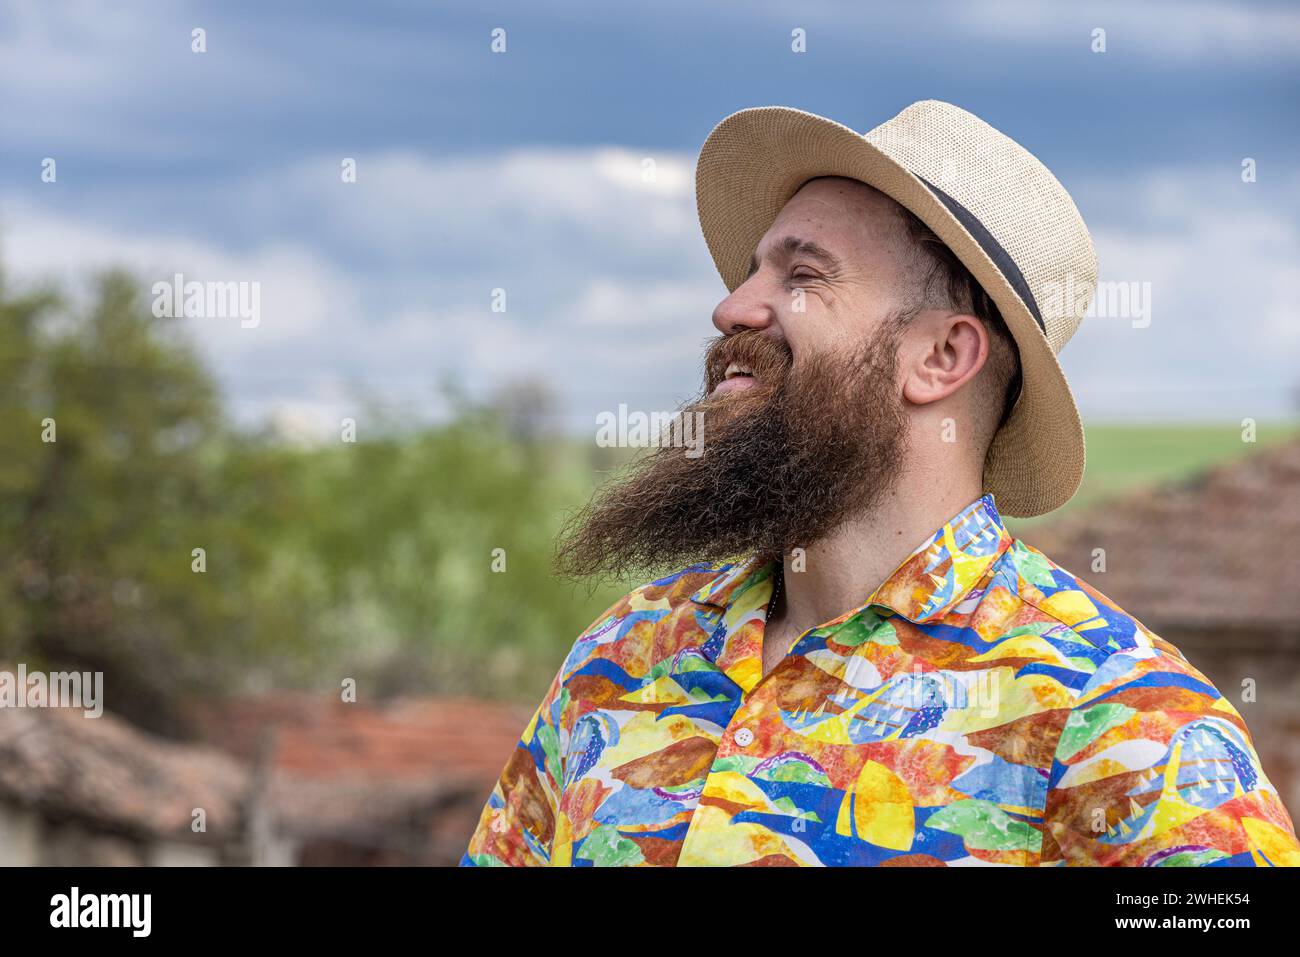 Young bearded man in fedora hat standing smiling happily. Close-up portrait of a bearded young man wearing casual clothes looking at the camera with a Stock Photo